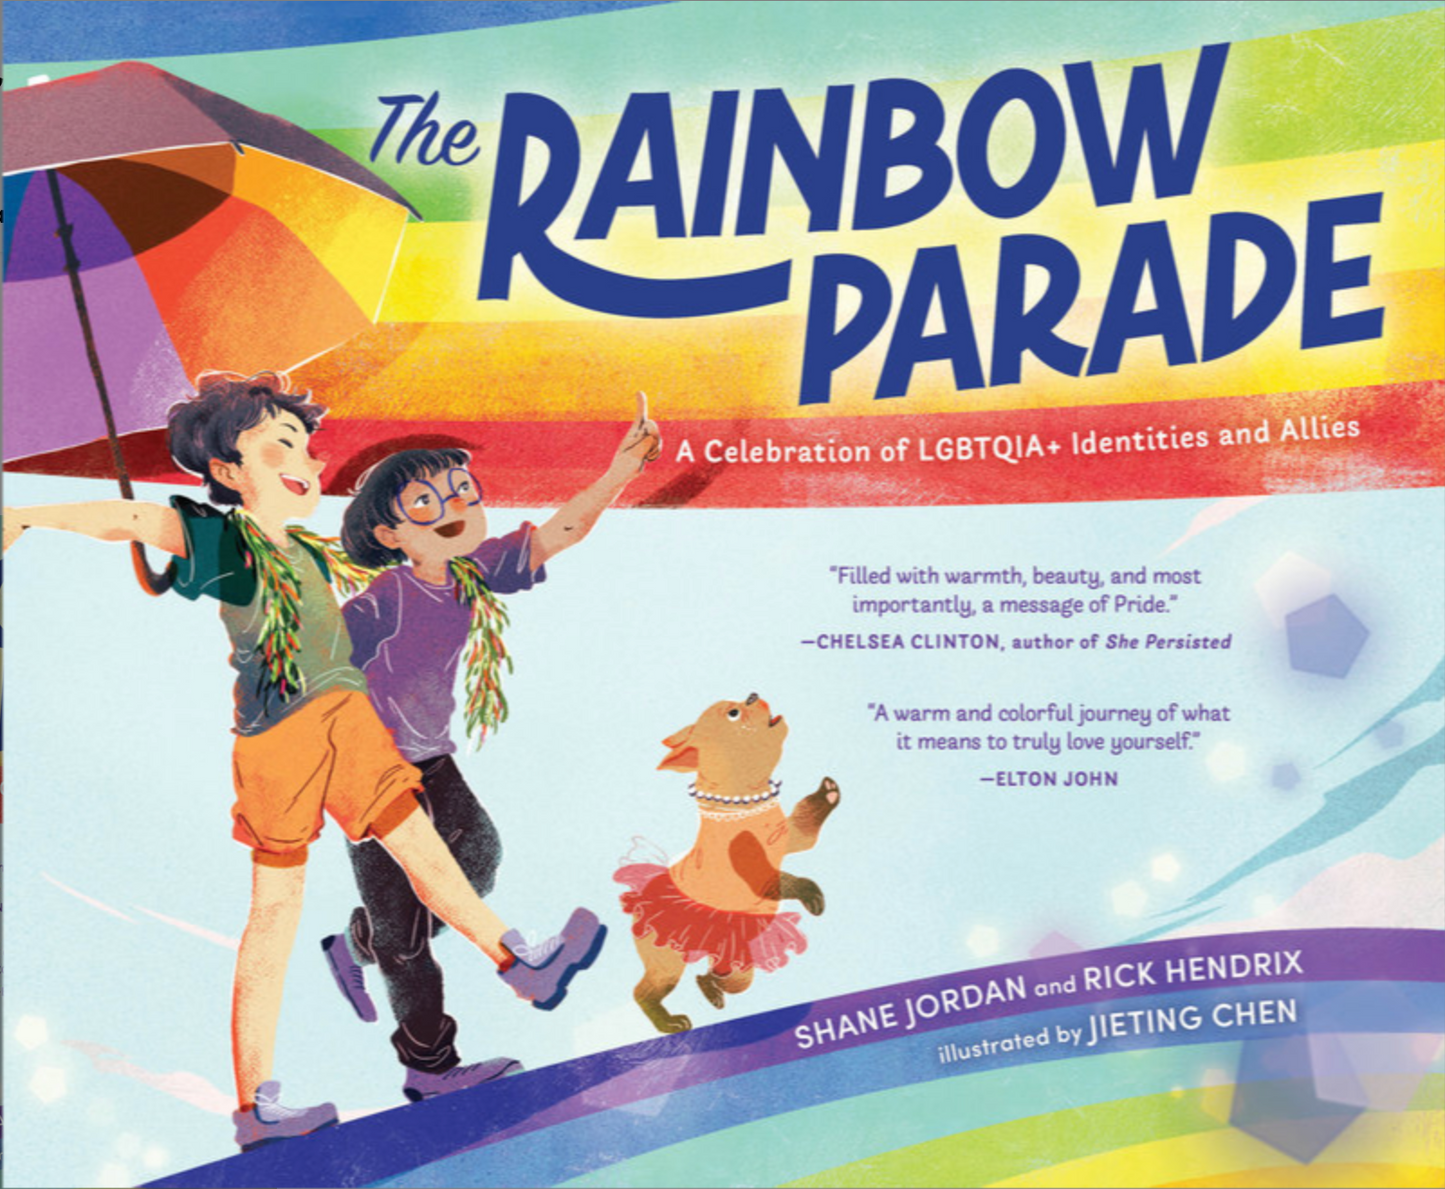 The Rainbow Parade A Celebration of LGBTQIA+ Identities and Allies